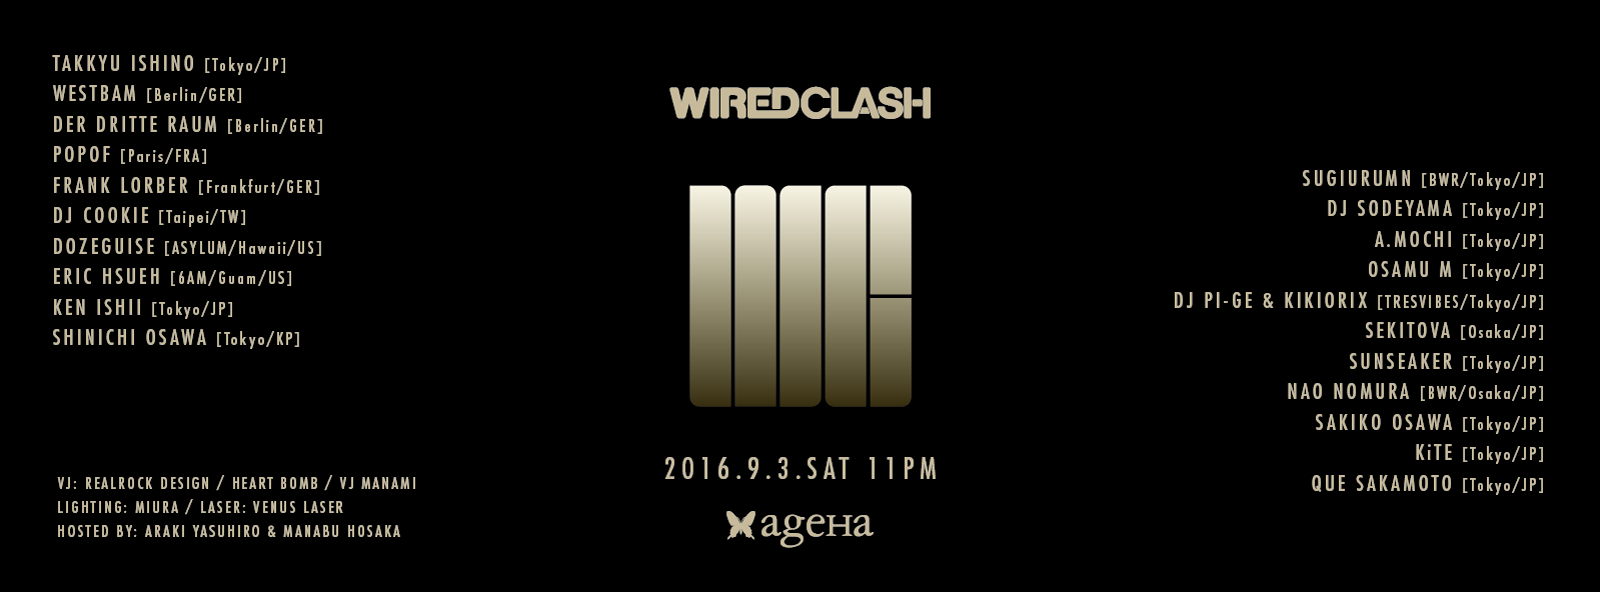 WIRED CLASH 2016